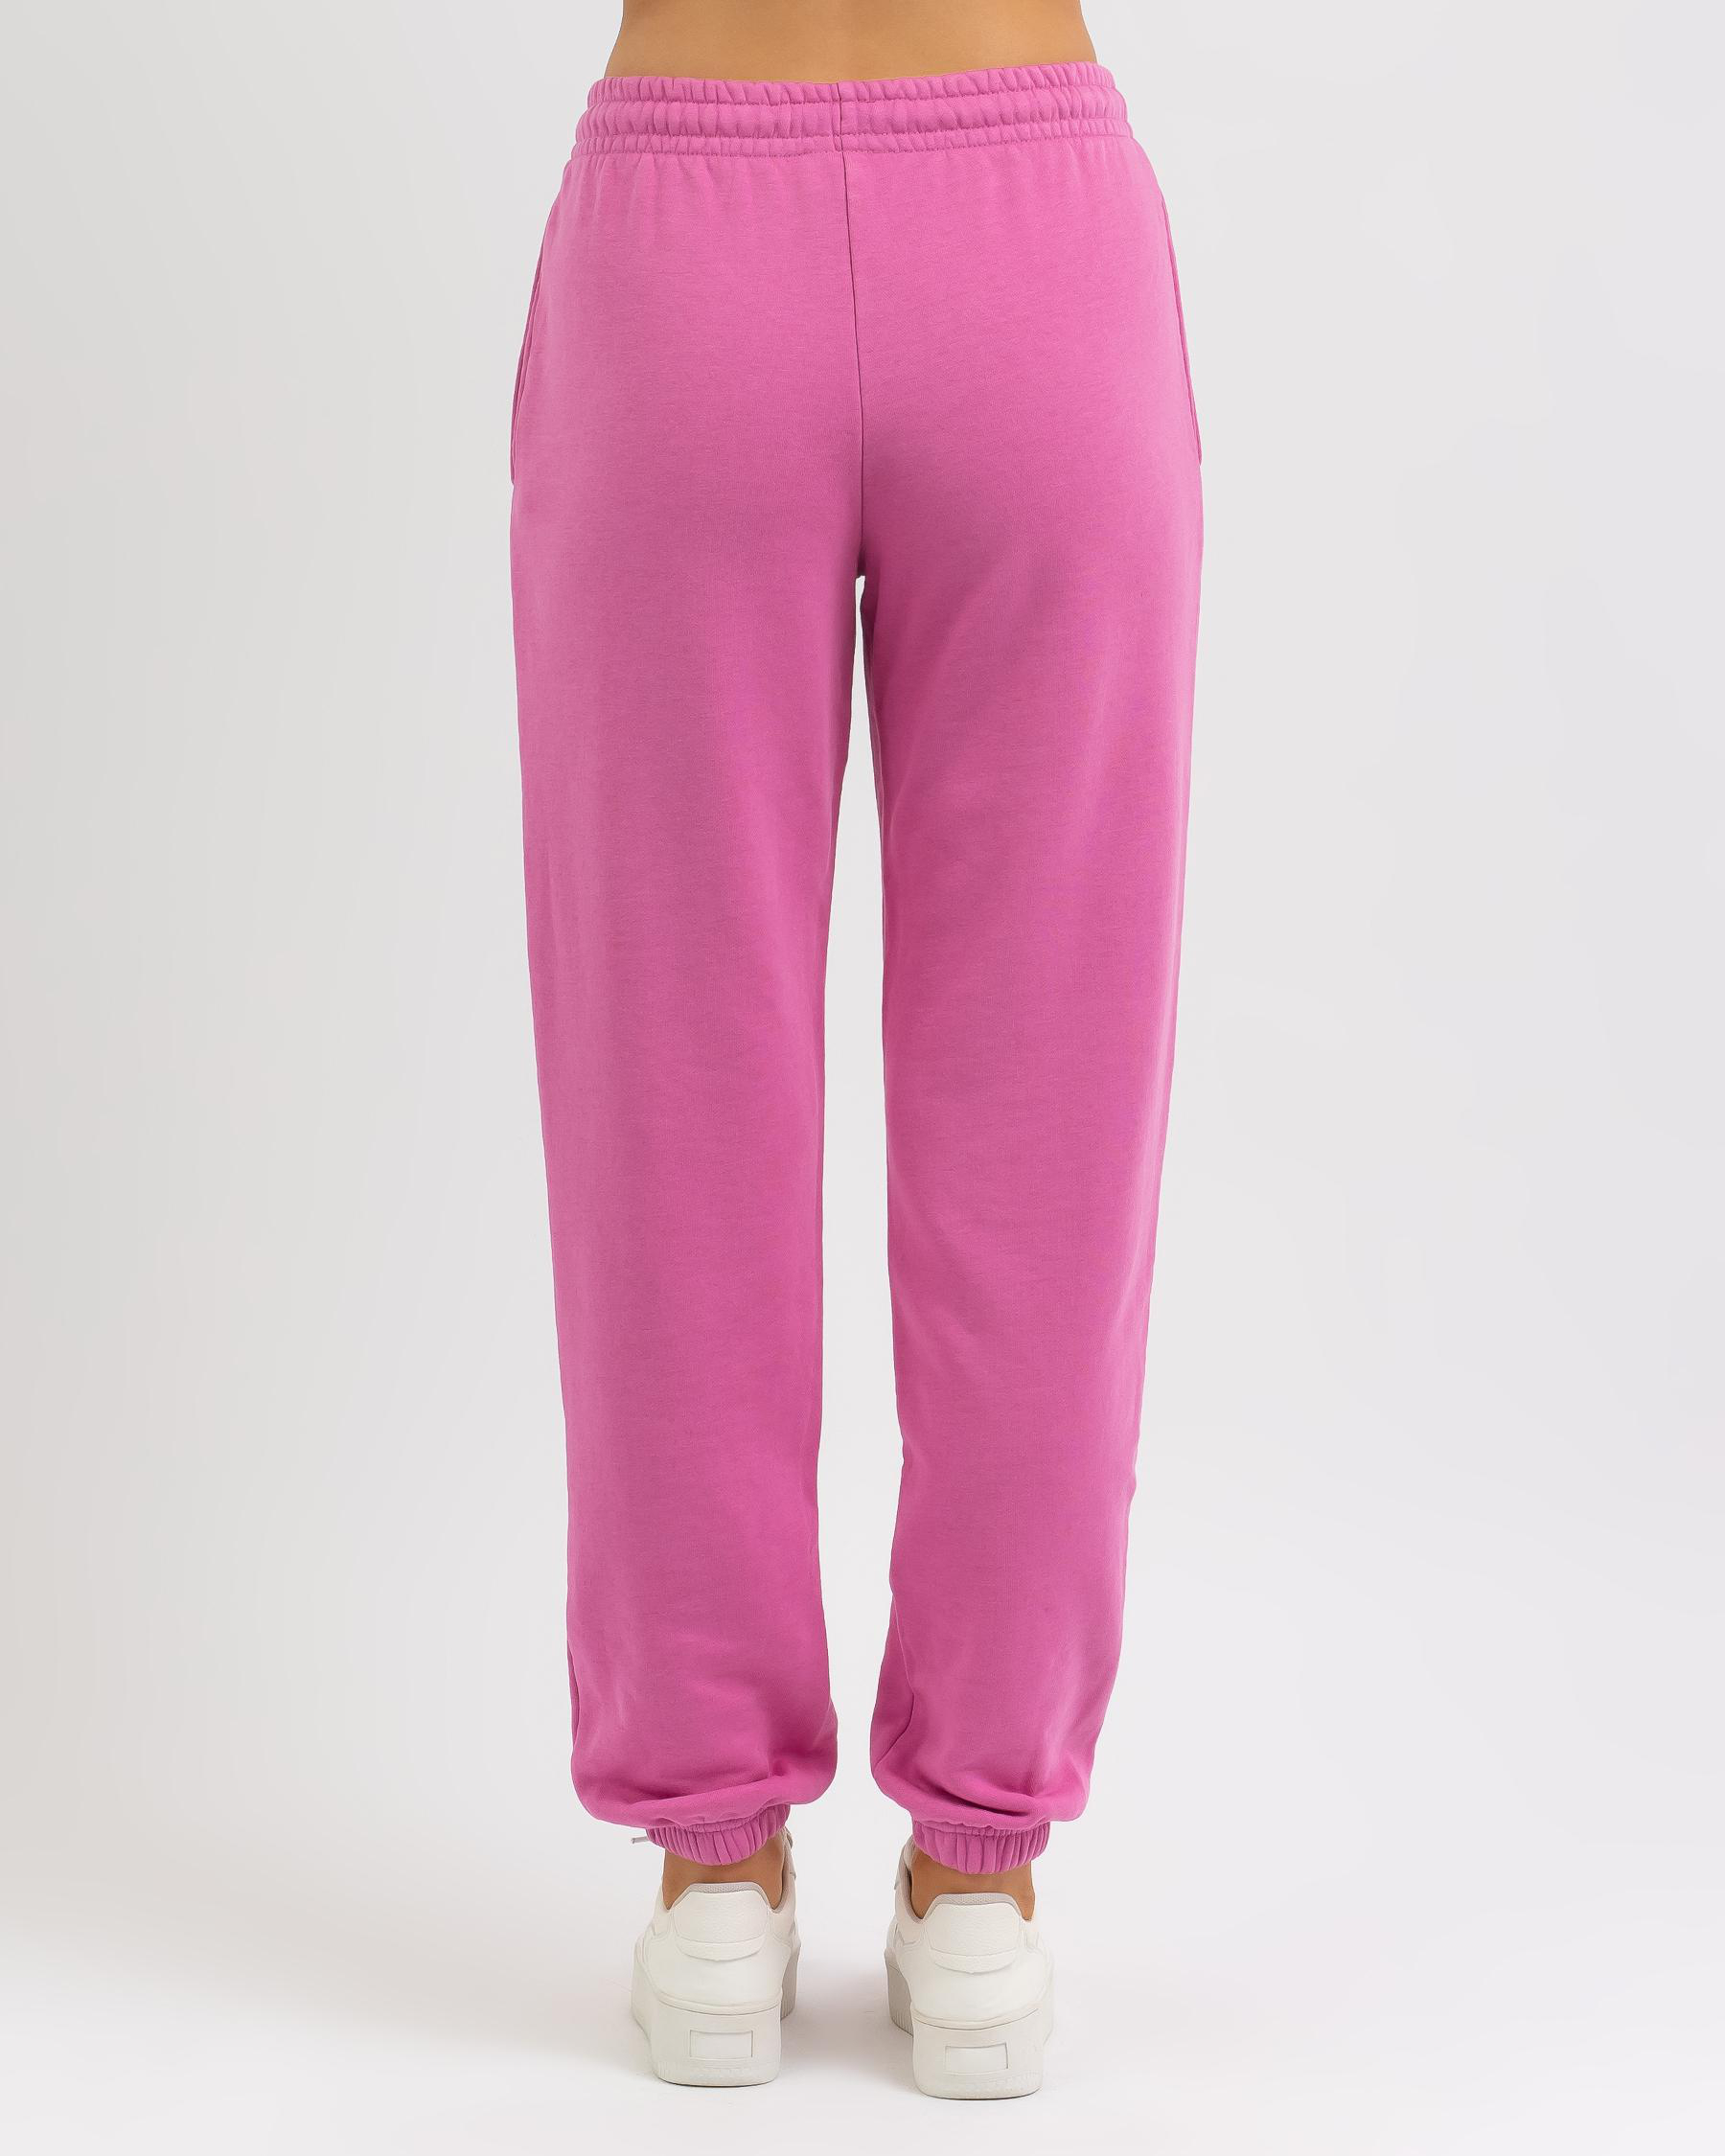 Russell Athletic Washback Track Pants In Pop Pink - Fast Shipping ...